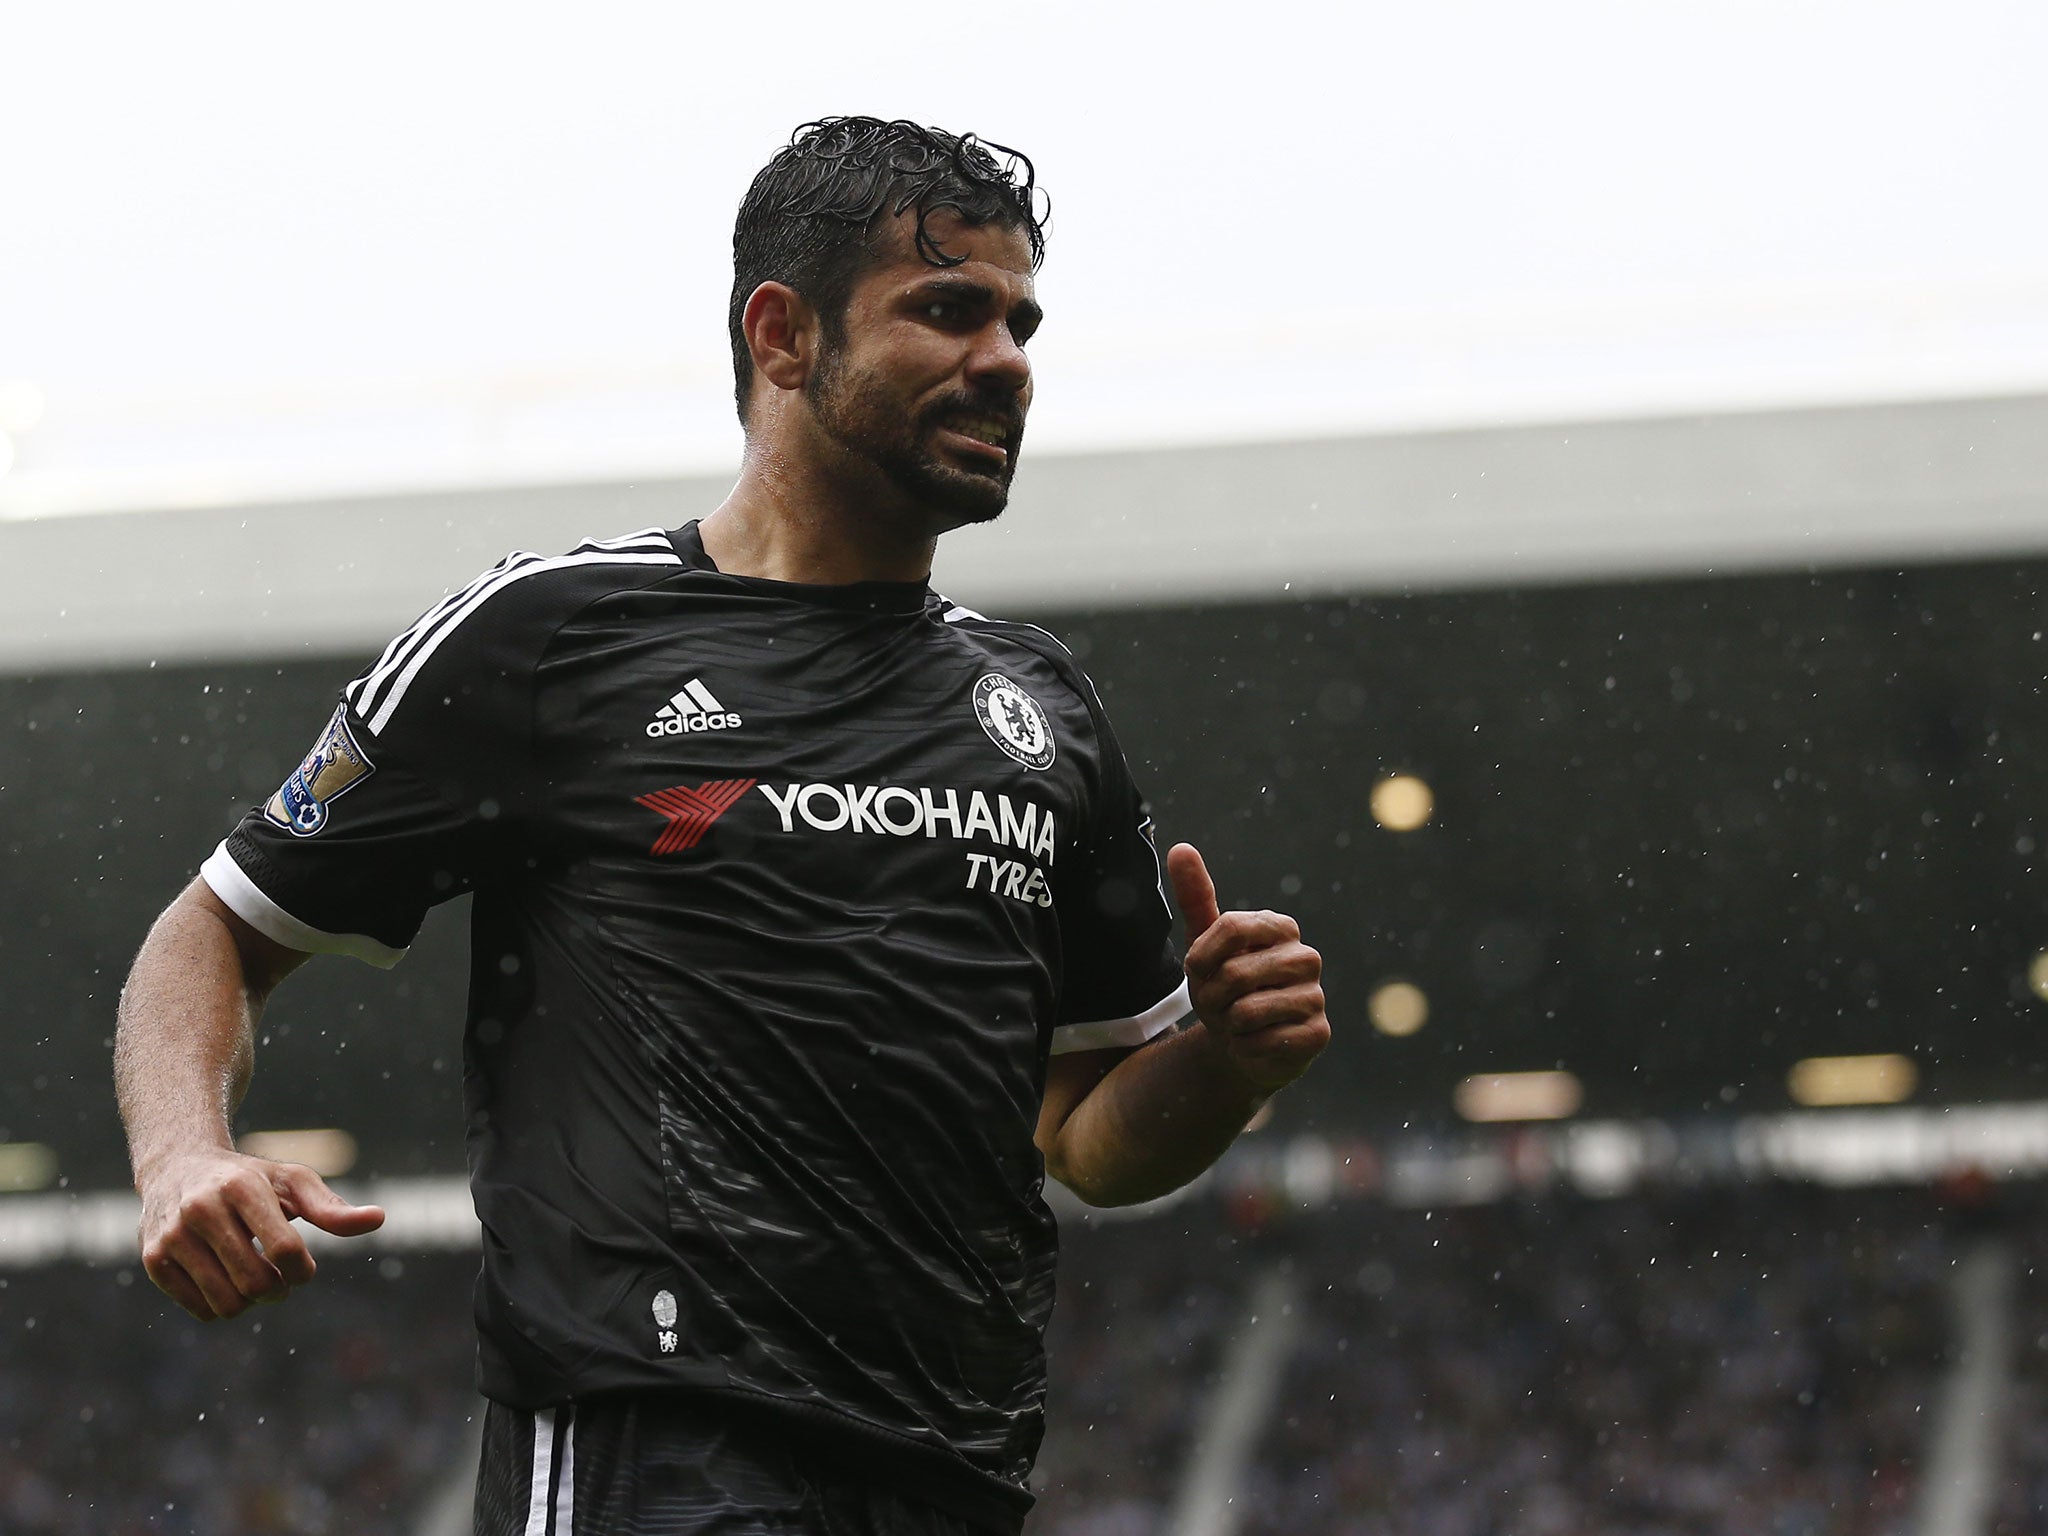 Diego Costa is reported to want a move back to Atletico Madrid